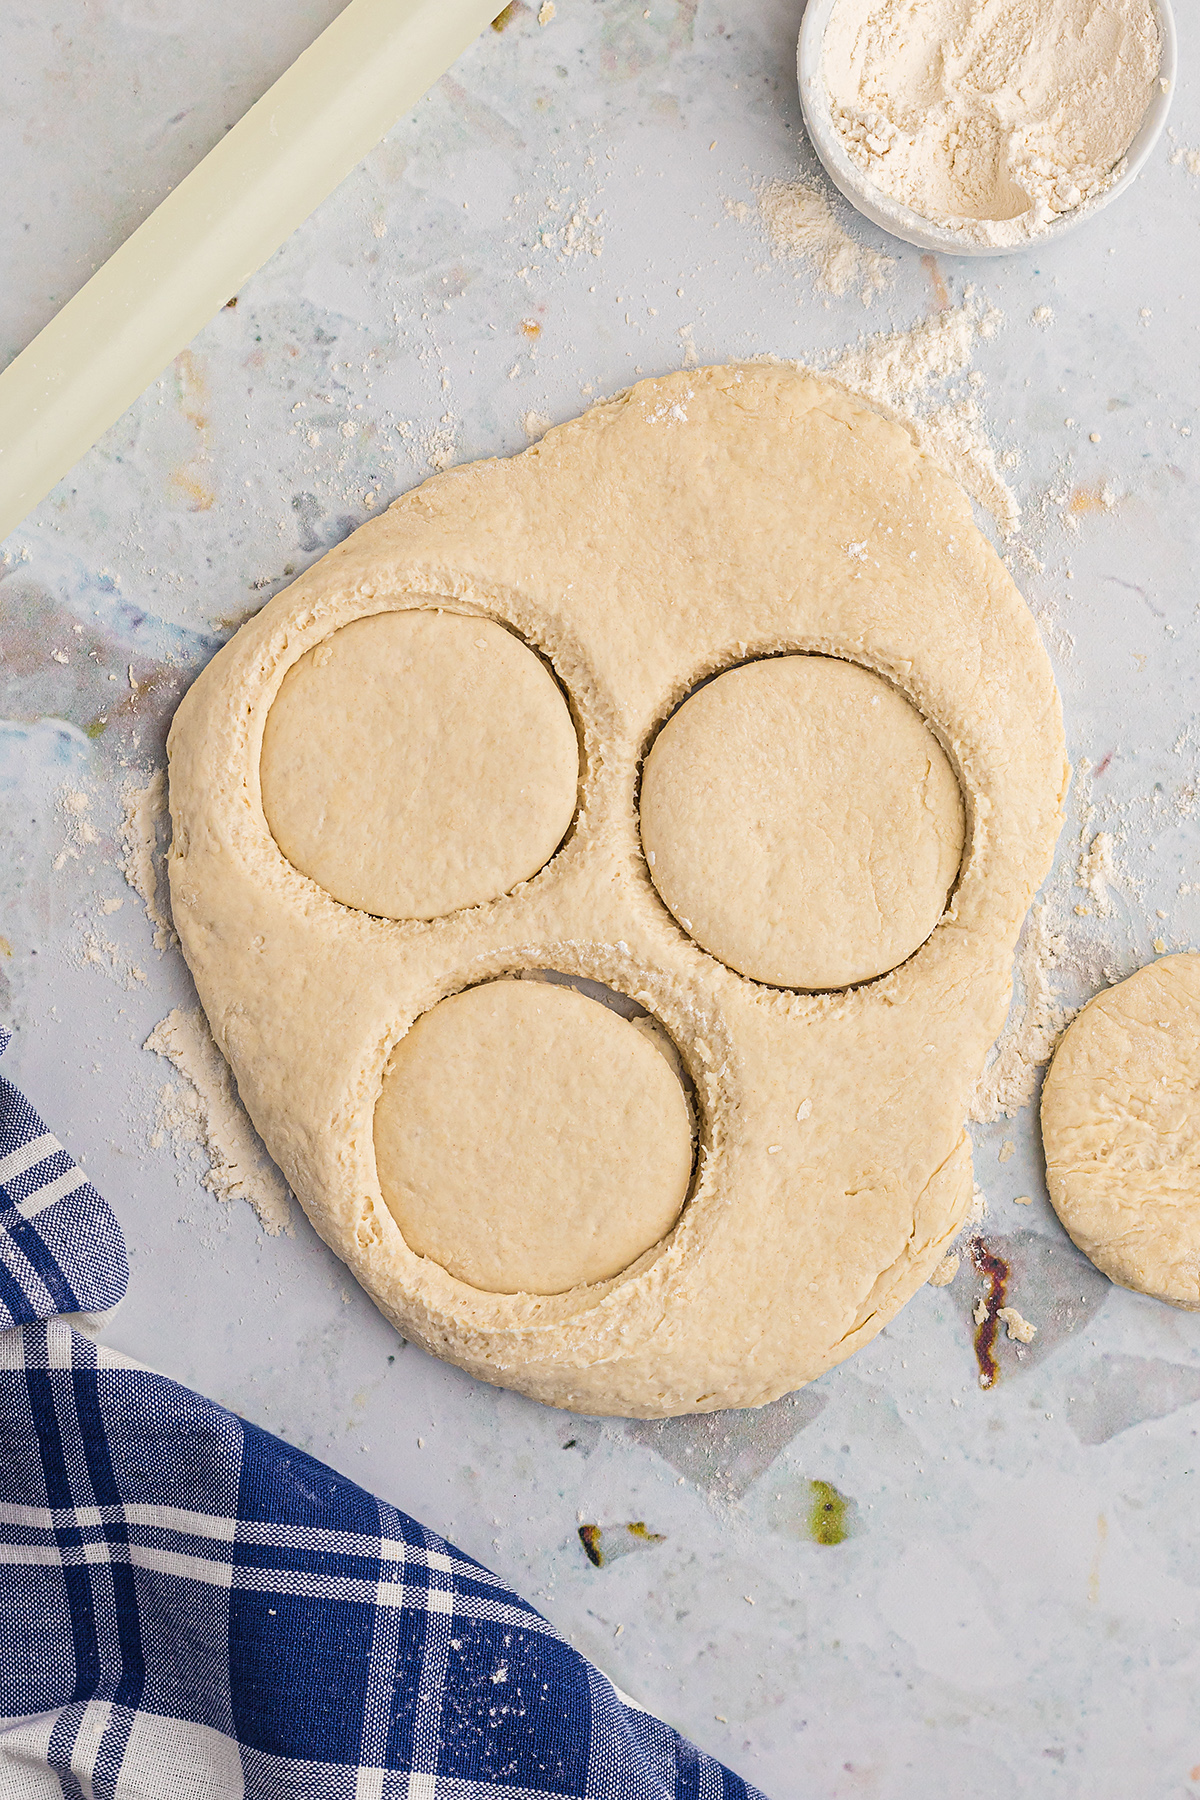 biscuit dough with round cut outs